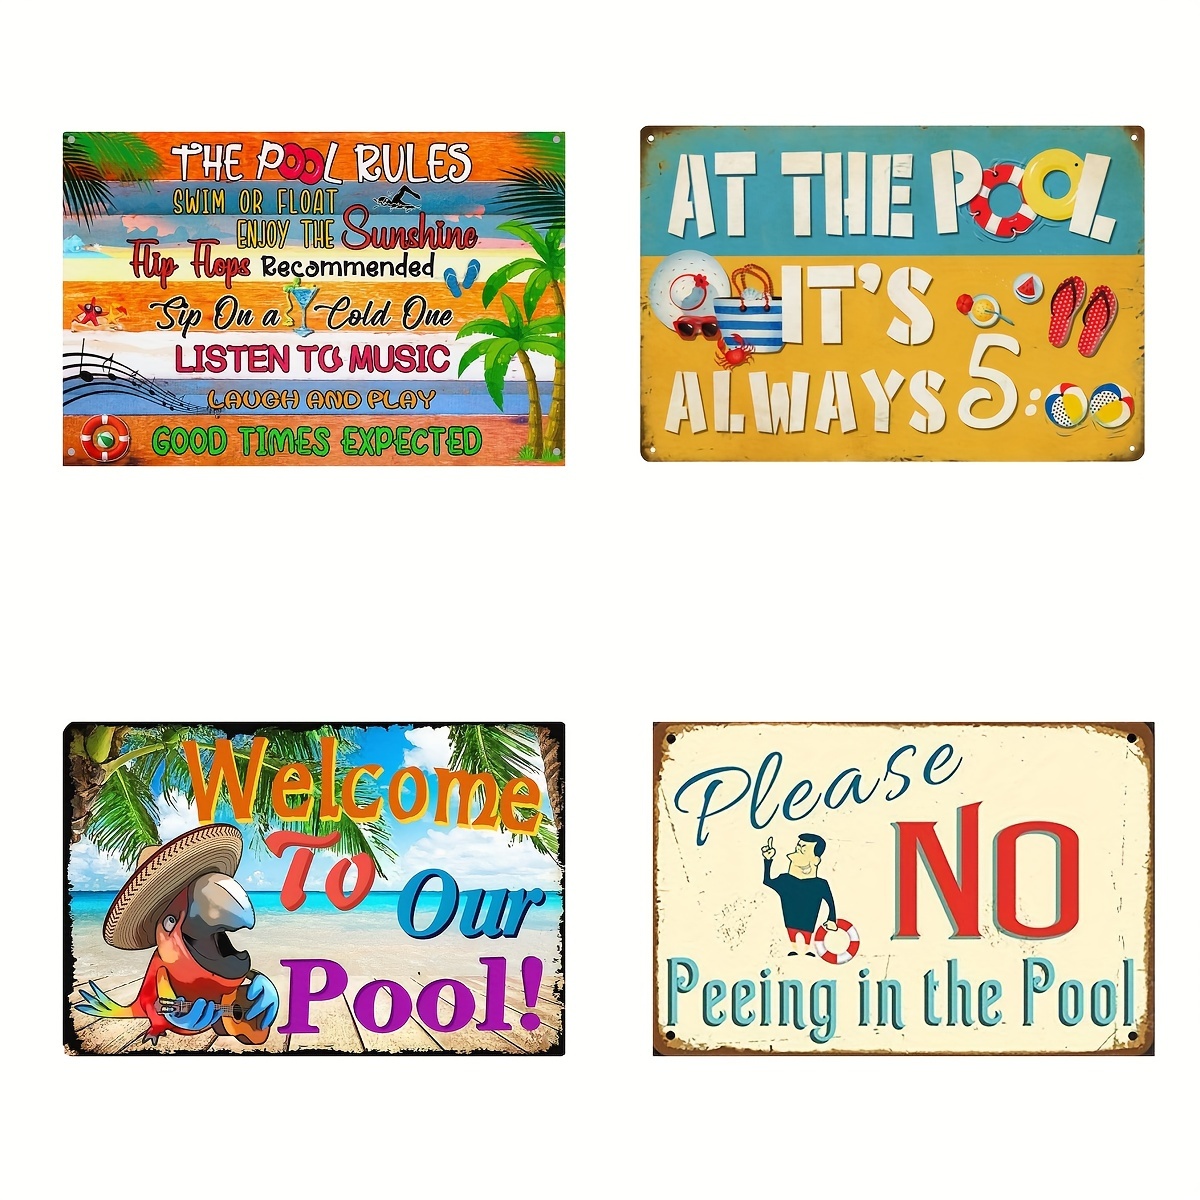 The pool rules